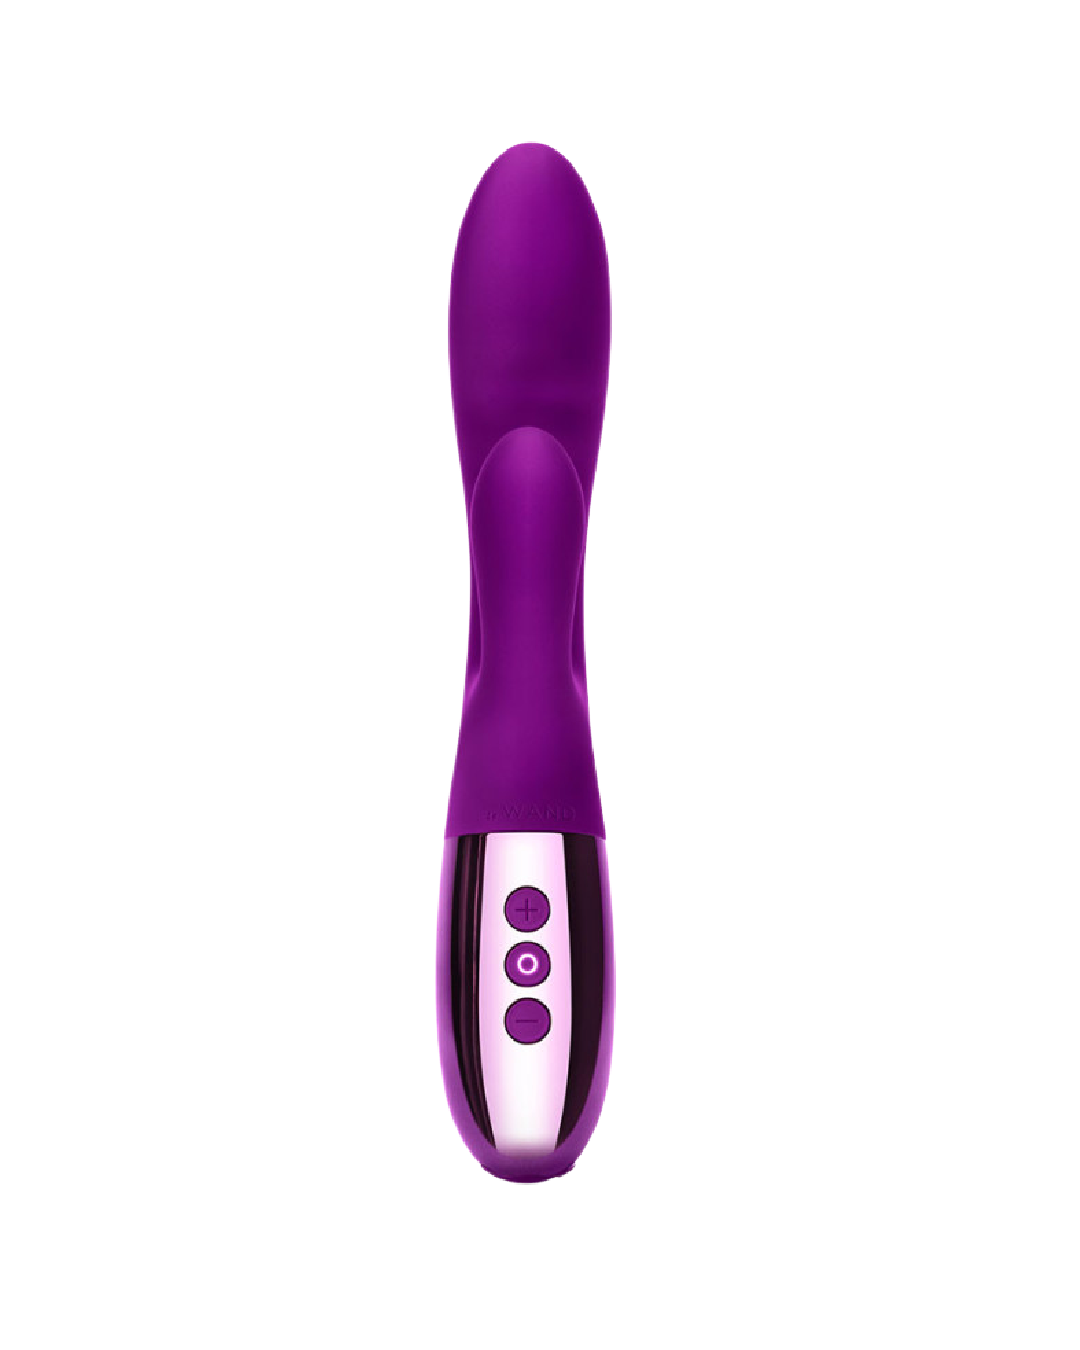 Le Wand Blend Double Motor Rechargeable Rabbit Vibrator - Dark Cherry front view of buttons